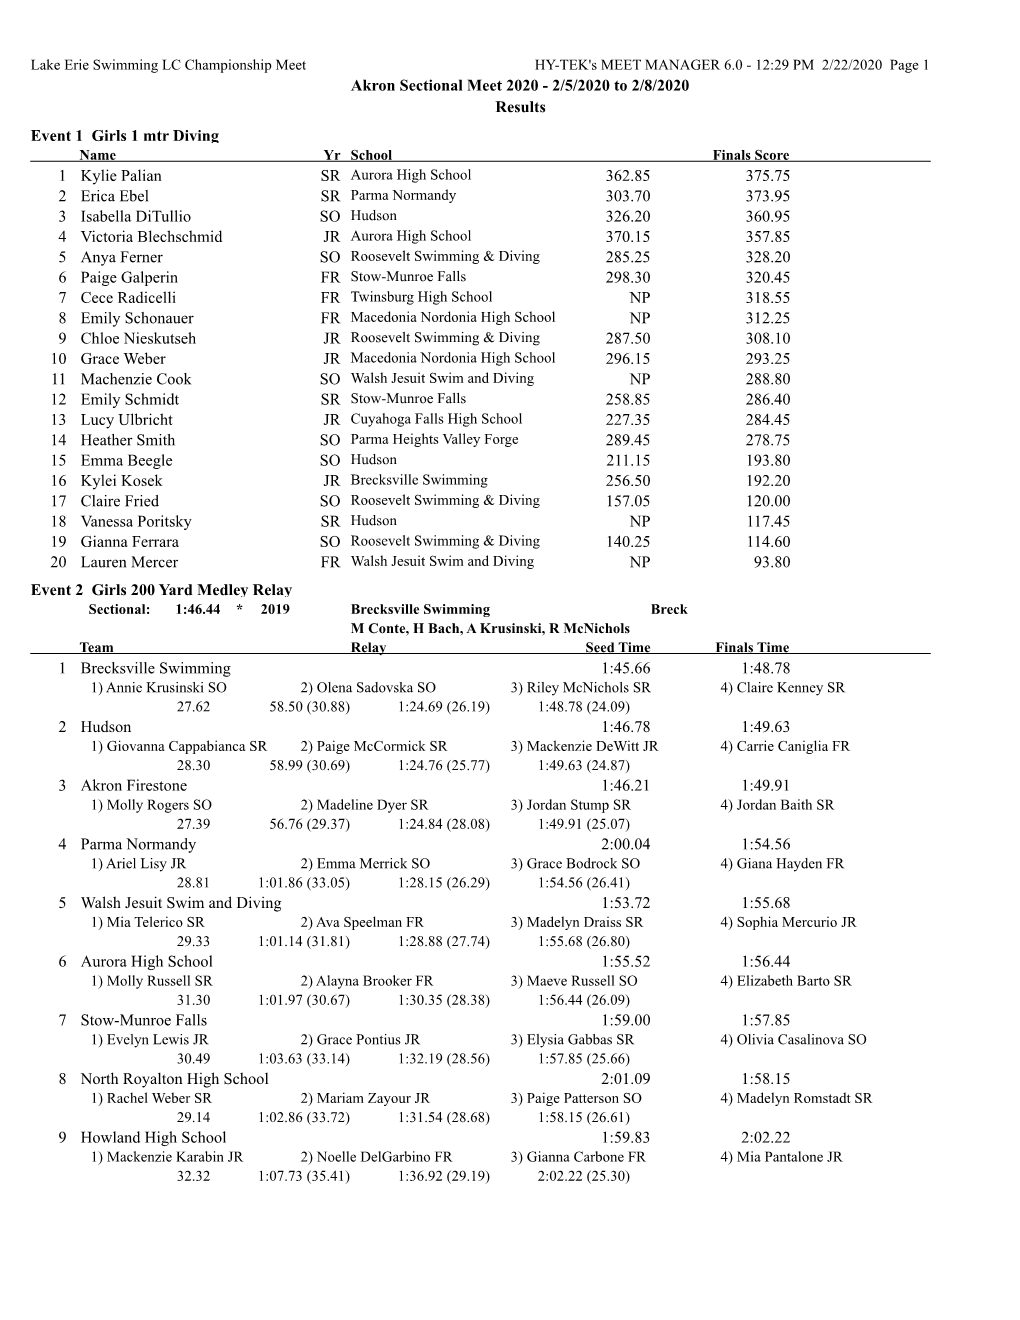 Akron Sectional Meet 2020 - 2/5/2020 to 2/8/2020 Results